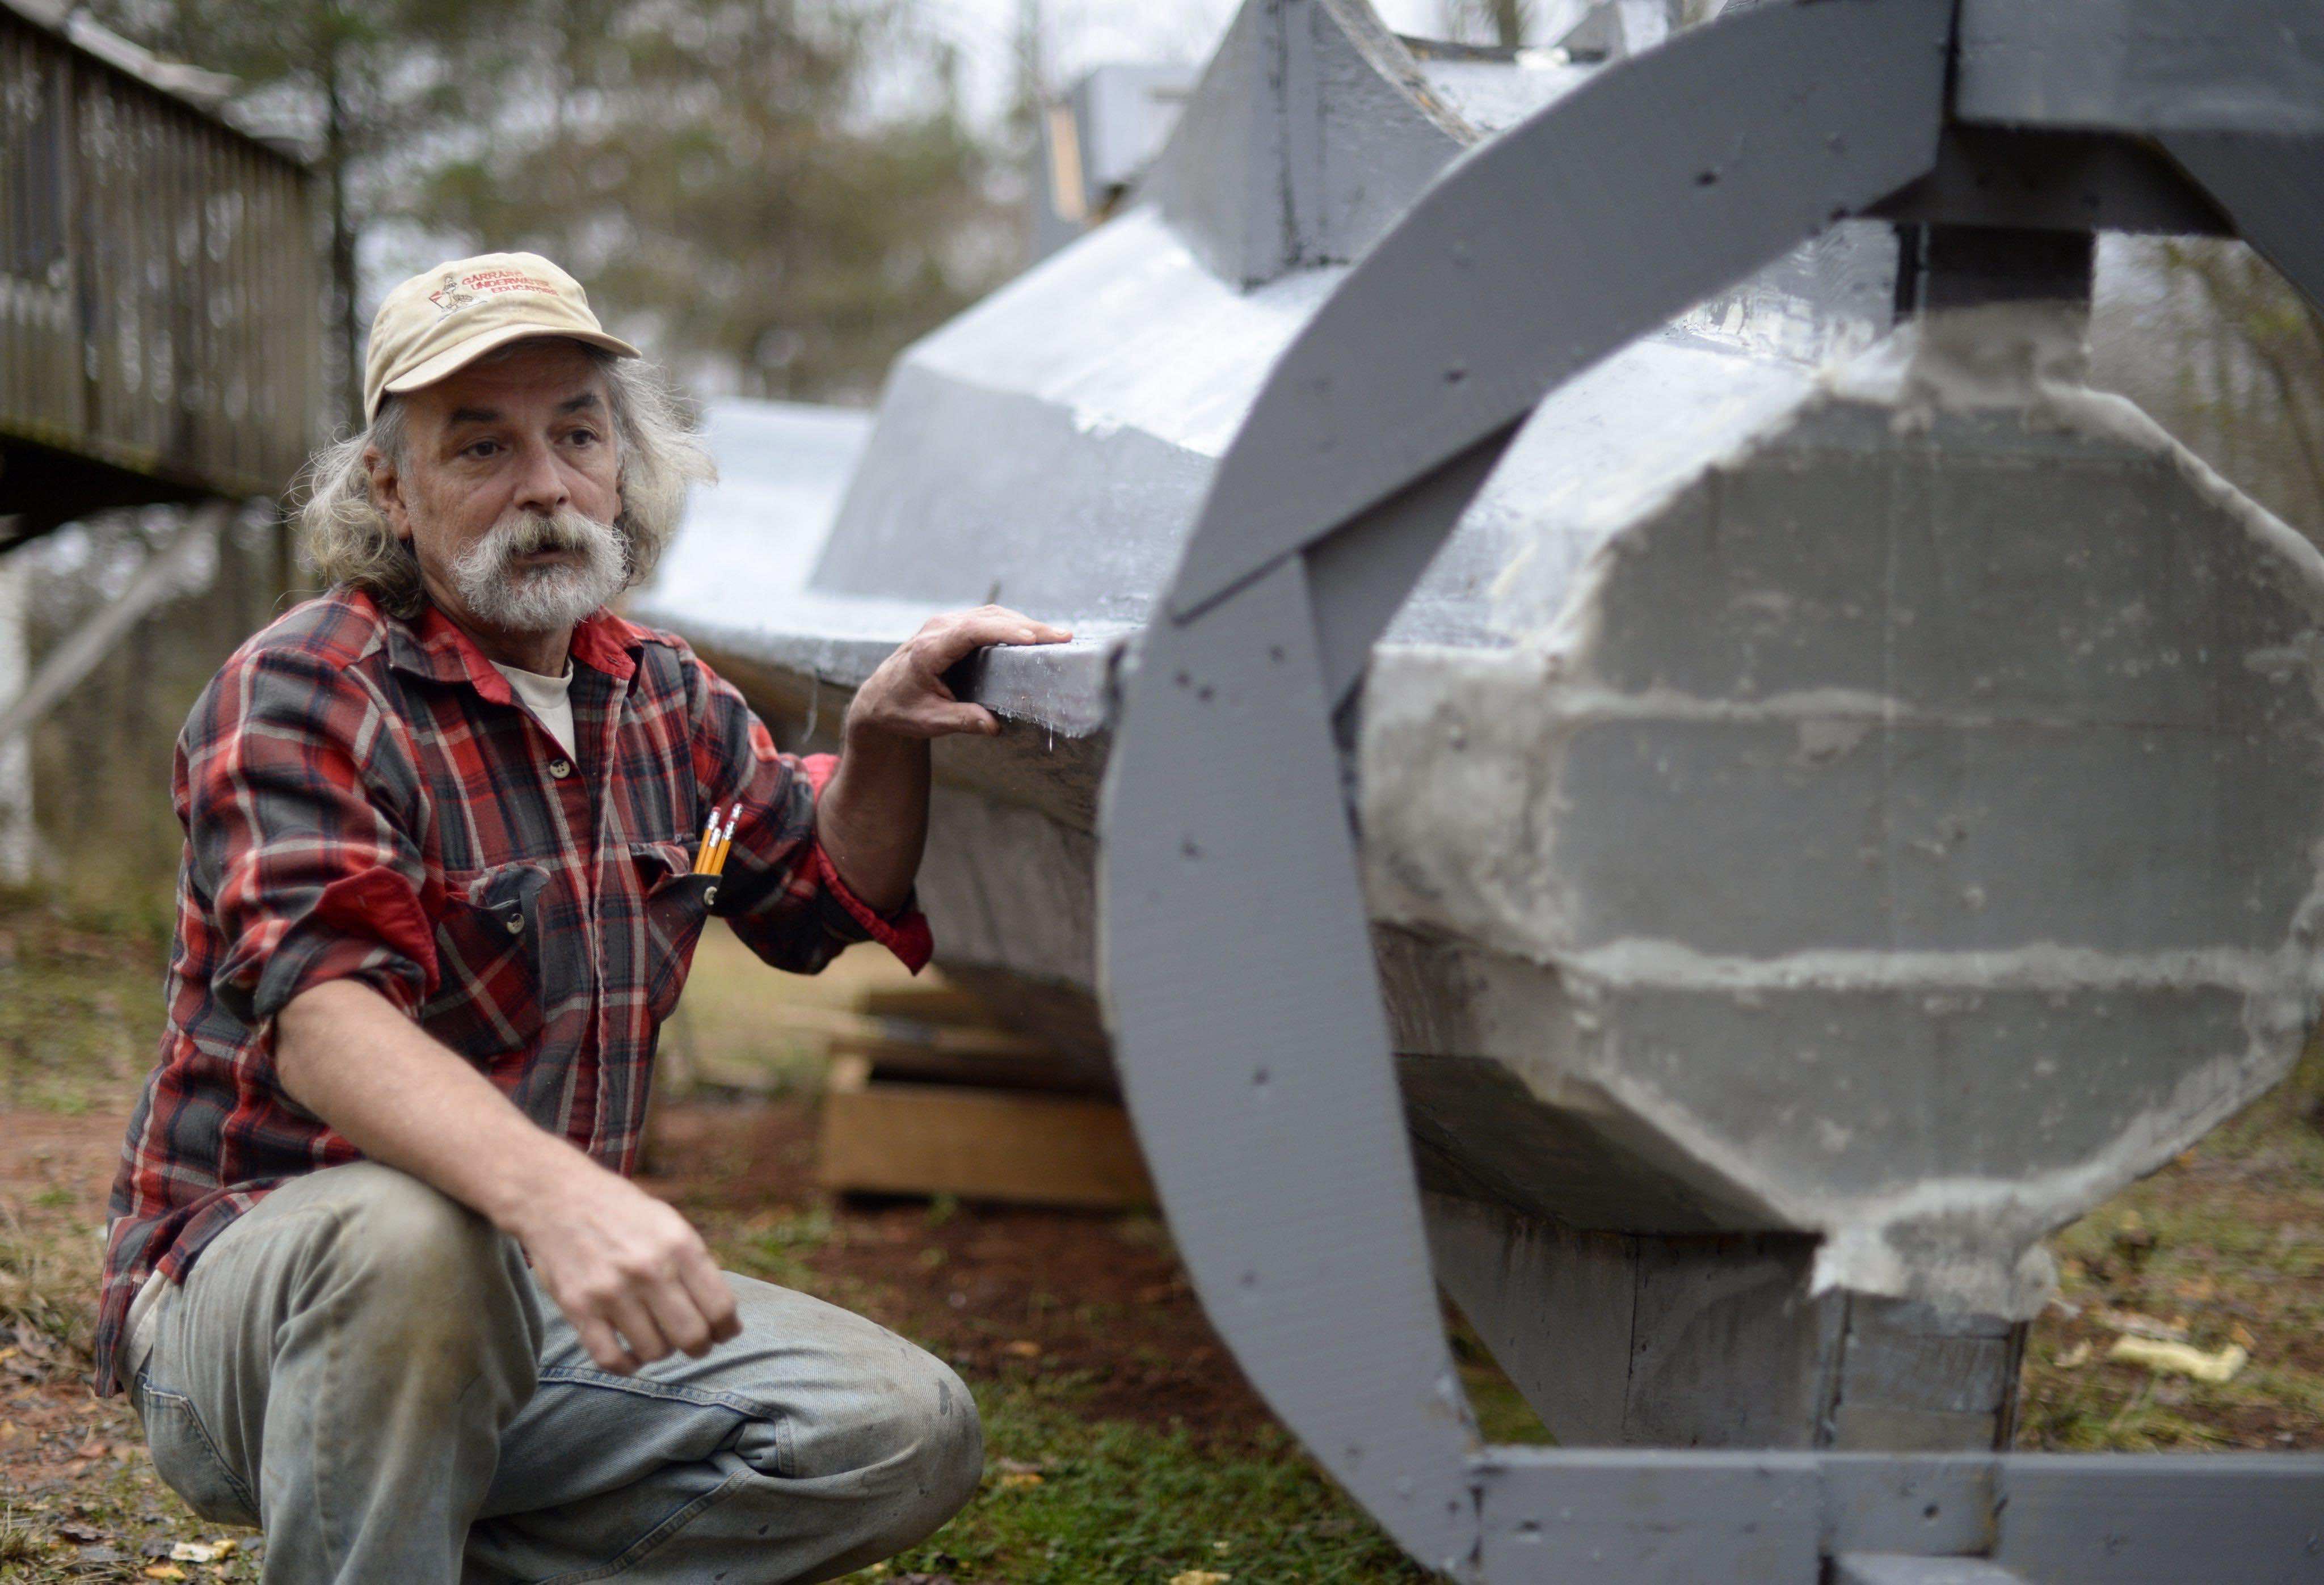 Man builds replica of the Nautilus from 20,000 Leagues Under the Sea